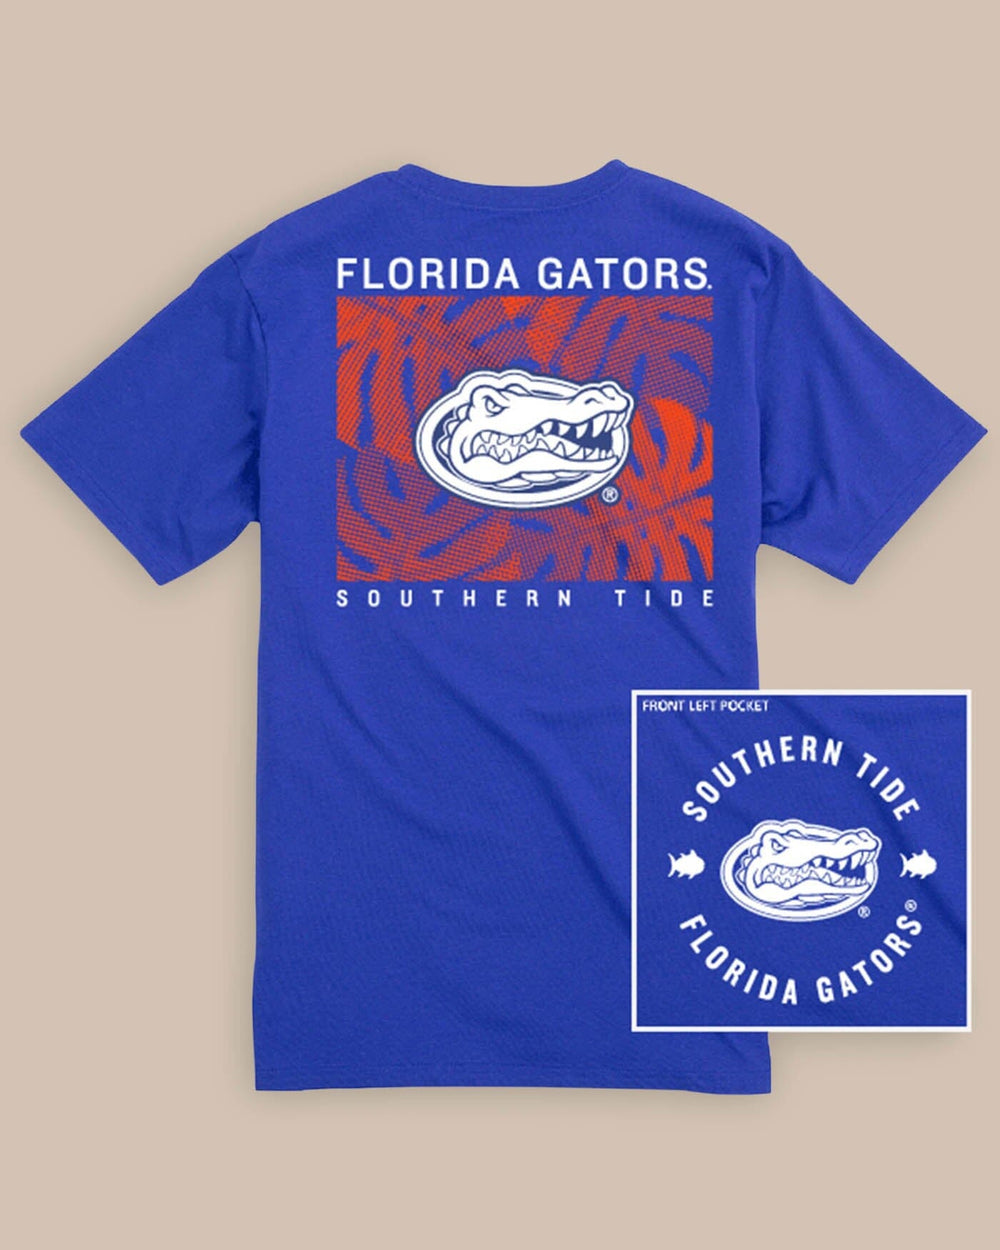 The front view of the Florida Gators Halftone Monstera T-Shirt by Southern Tide - University Blue